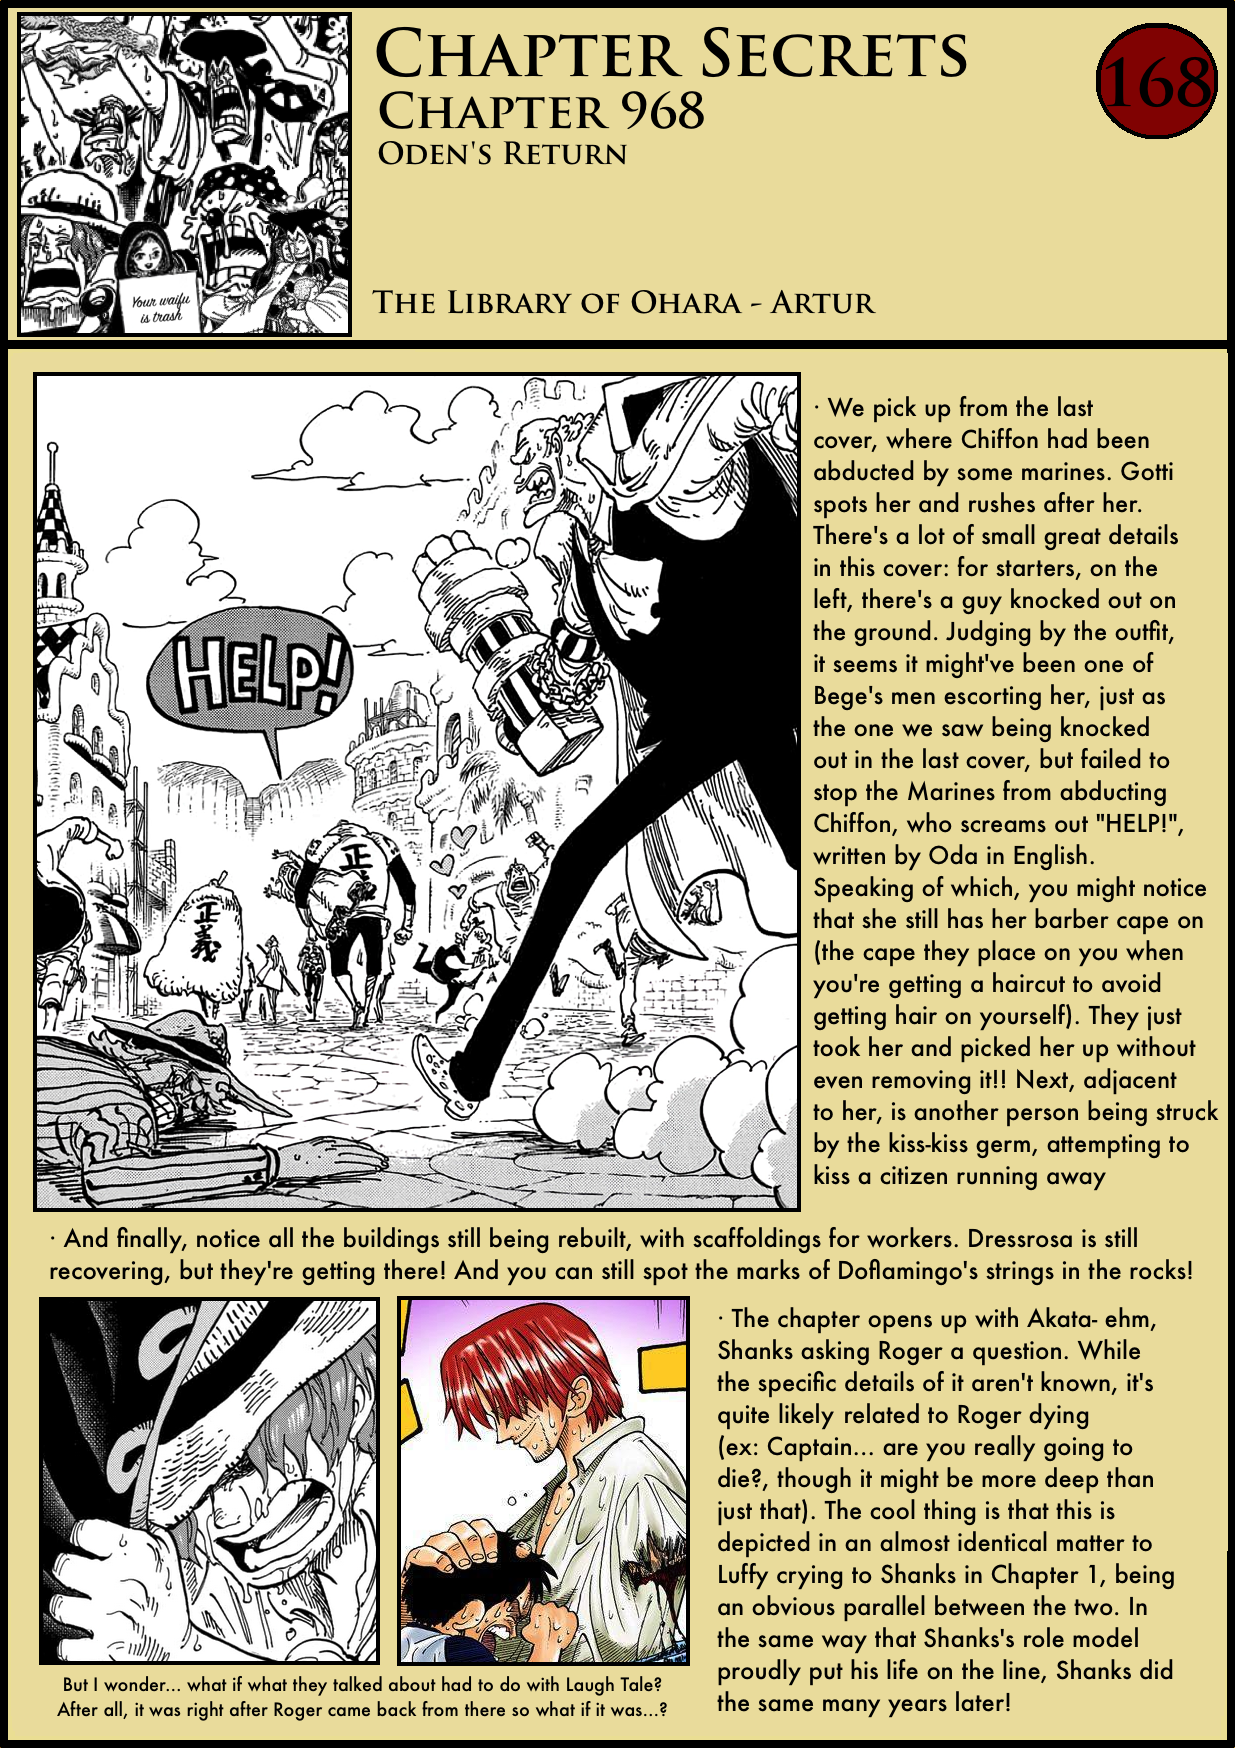 Chapter Secrets Chapter 968 In Depth Analysis The Library Of Ohara